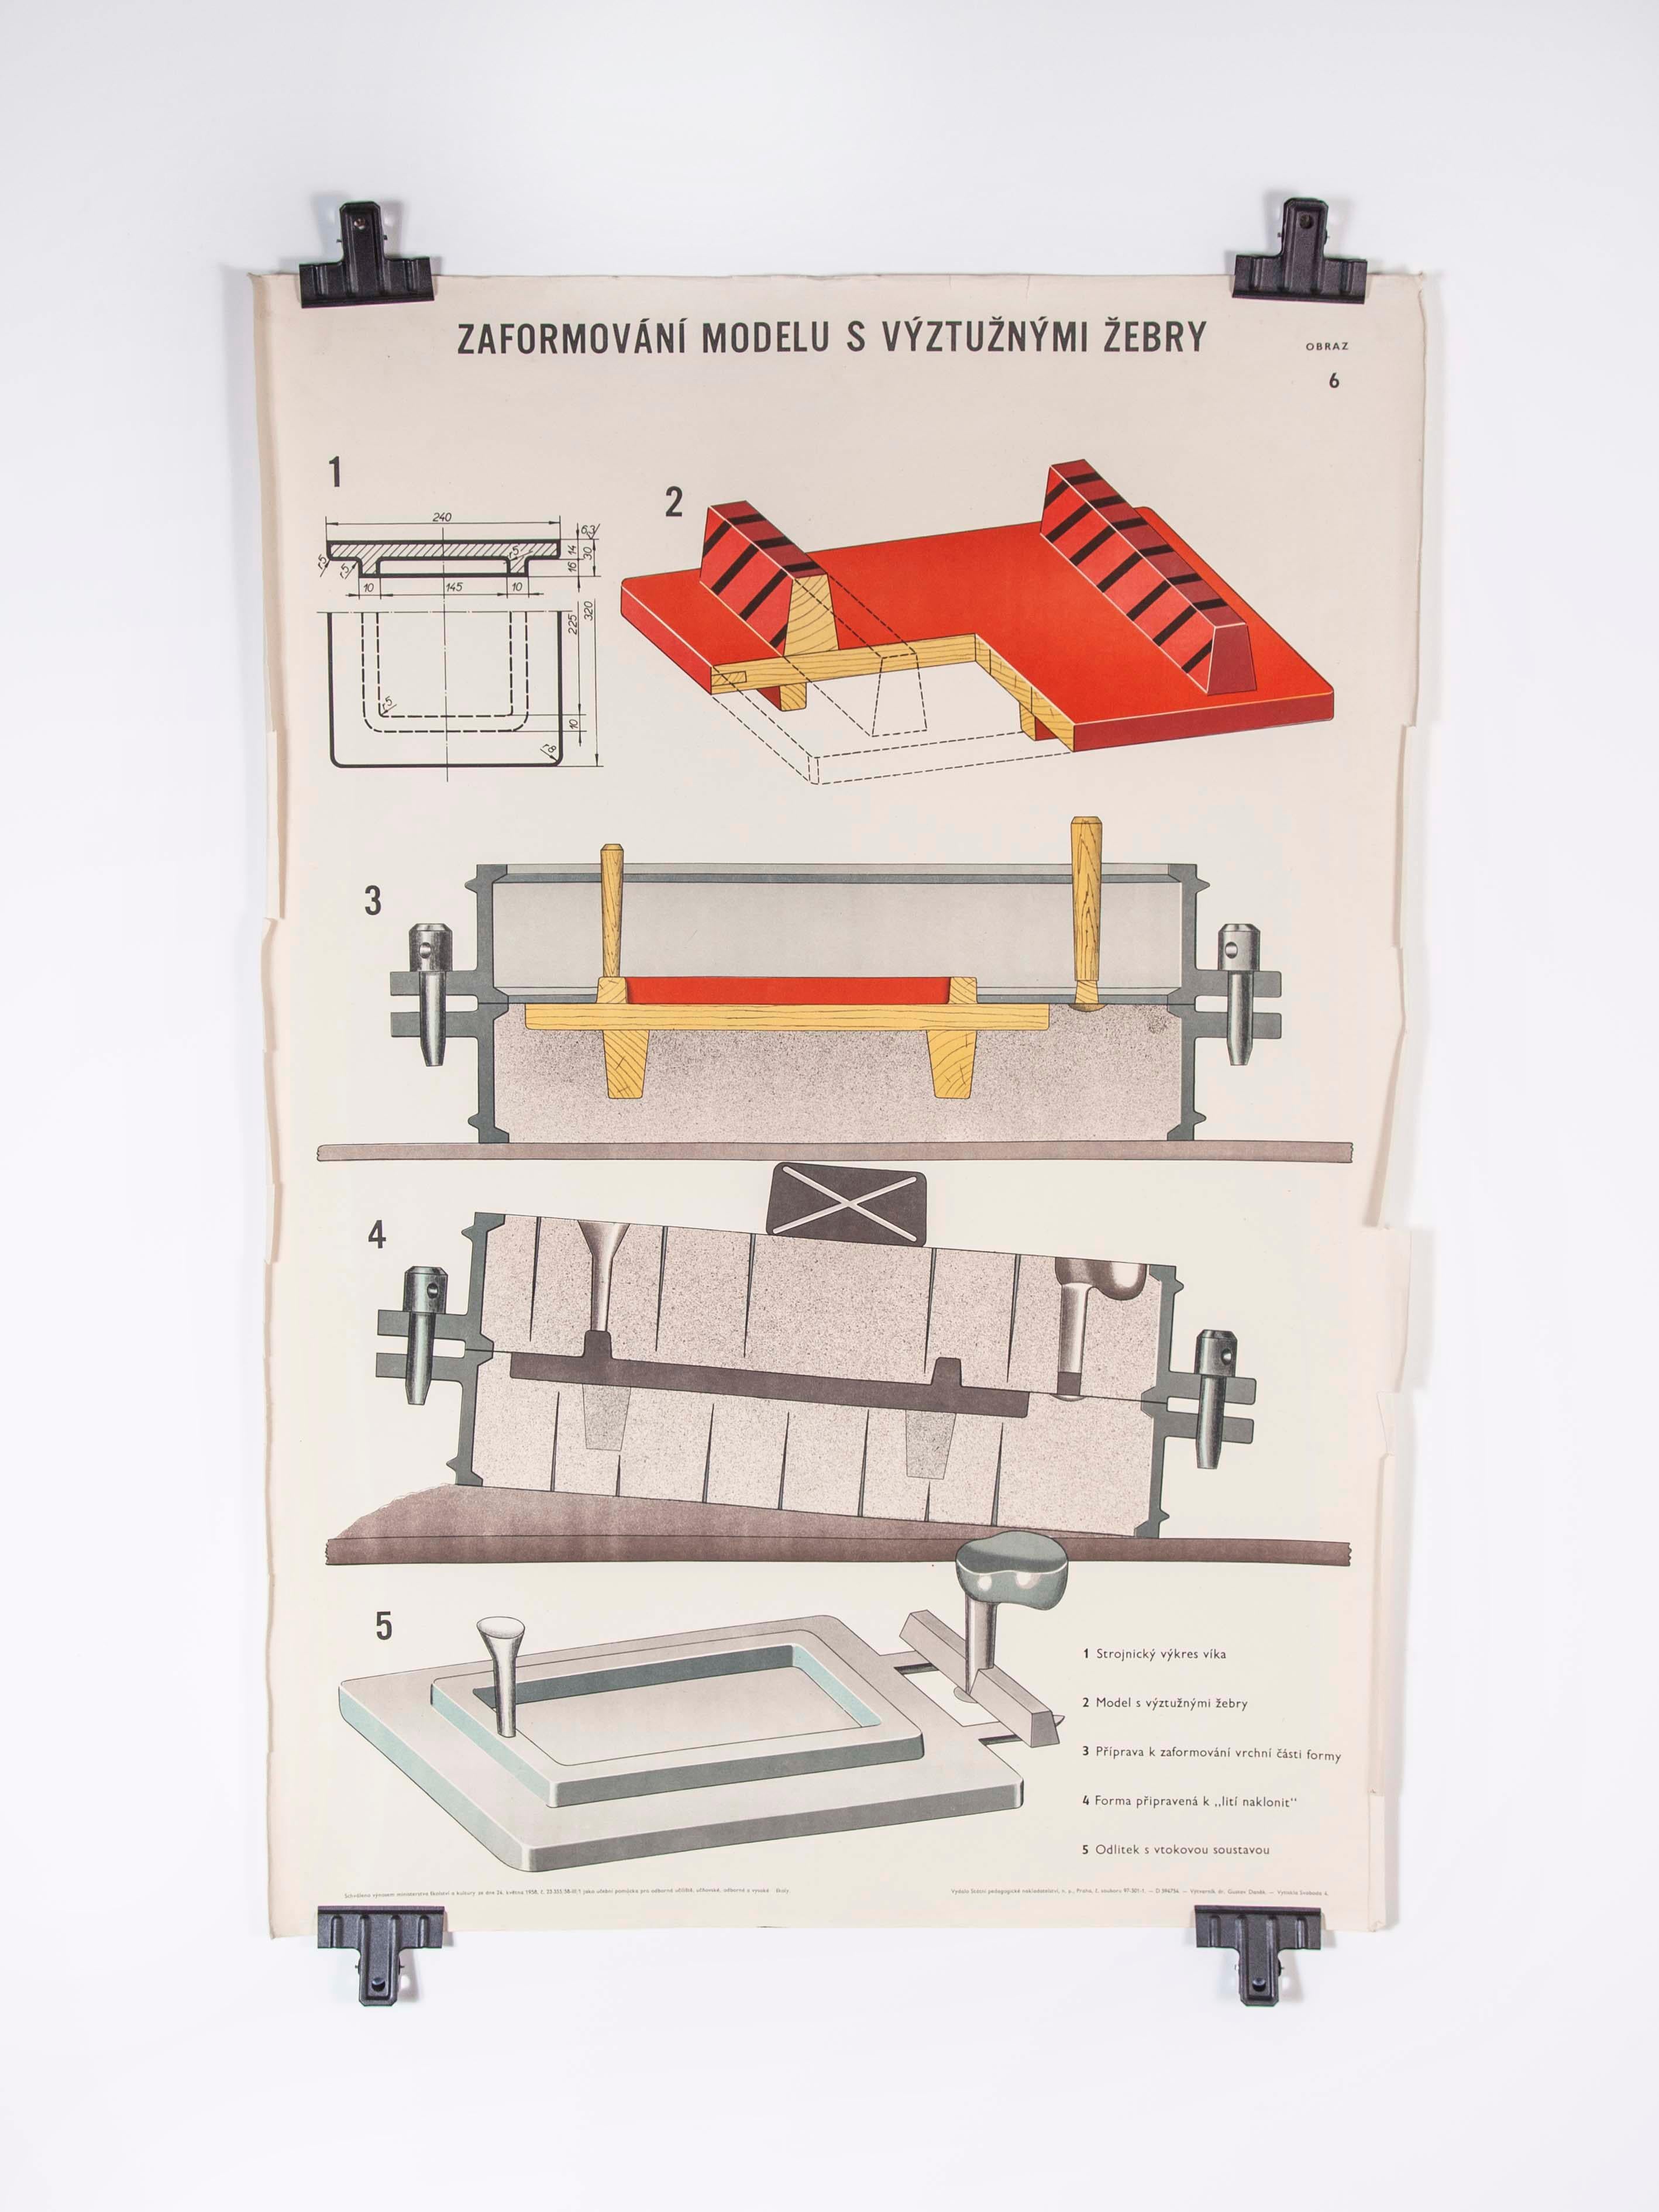 Czech technical industrial drawing, foundry Mould engineering poster – 4

Sourced from an old engineering workshop in the Czech Republic, an amazing series of technical Industrial drawings explaining the process of sand casting and creating the